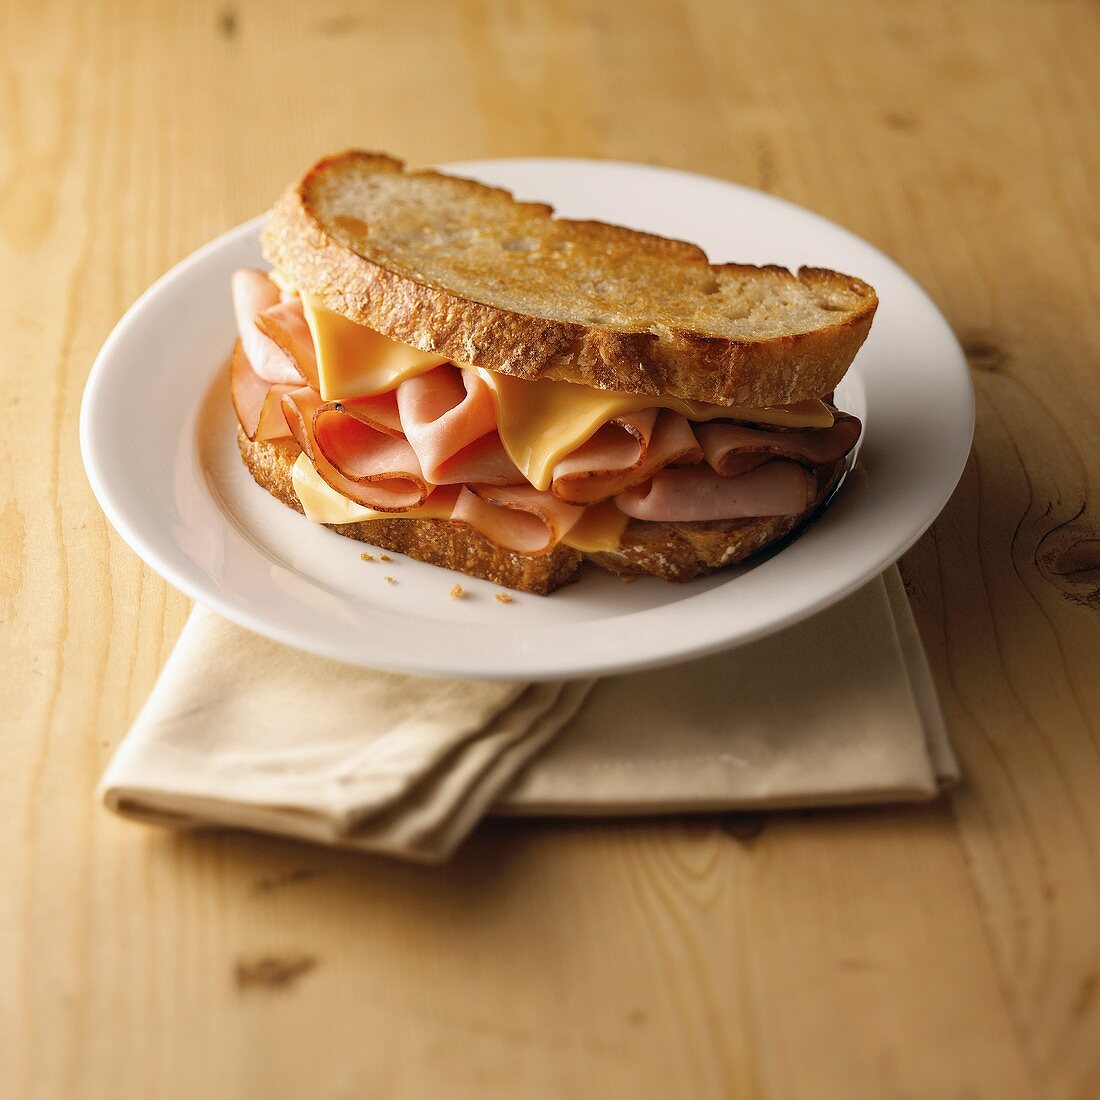 A Grilled Ham and Cheese on Sourdough